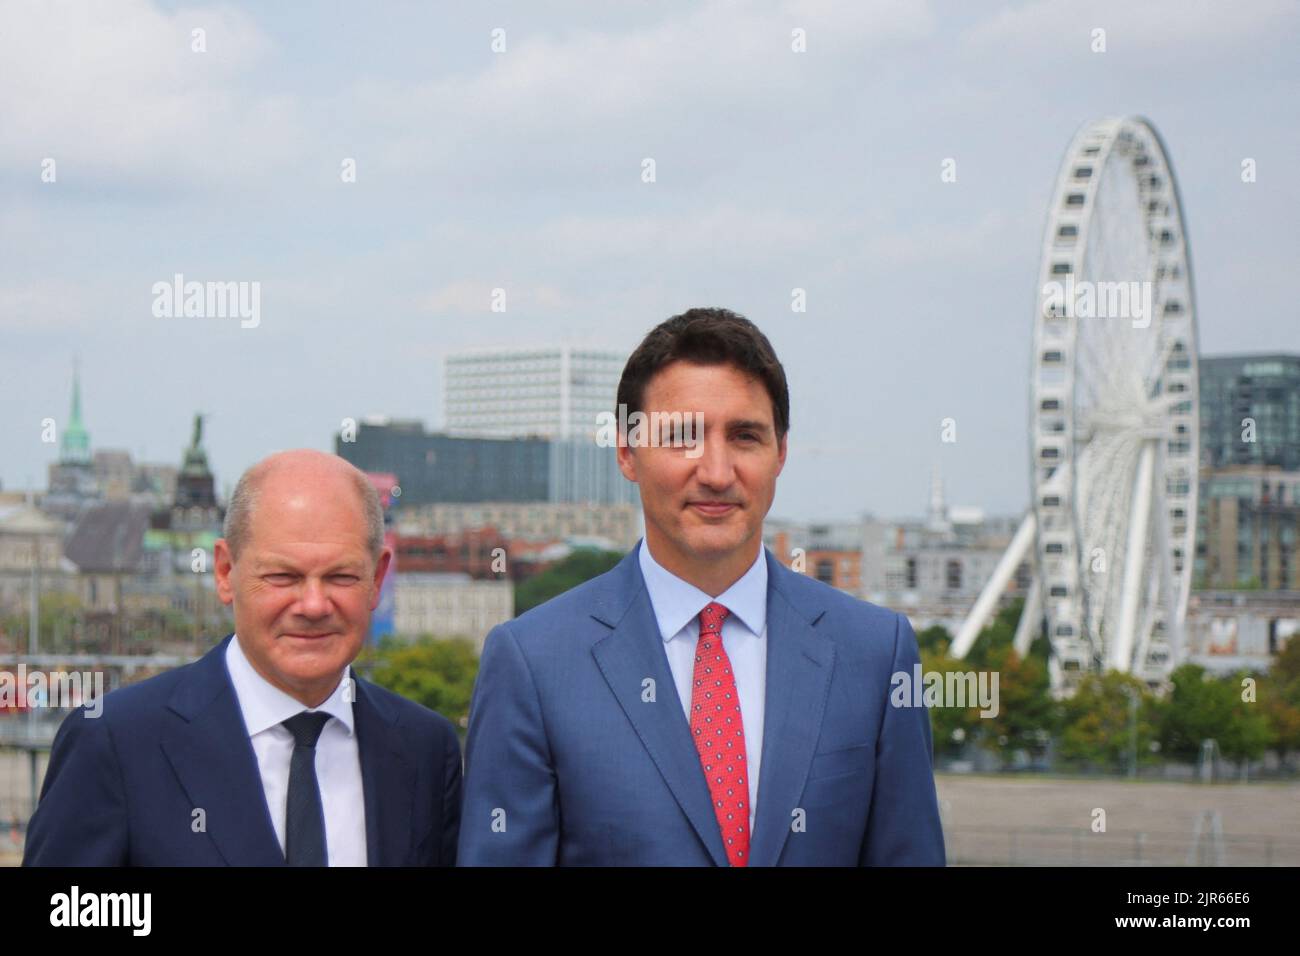 Germany's Chancellor Olaf Scholz and Canada's Prime Minister Justin Trudeau attend to speak to the media outside the Montreal Science Centre, in Montreal, Quebec, Canada August 22, 2022. REUTERS/Christinne Muschi Stock Photo